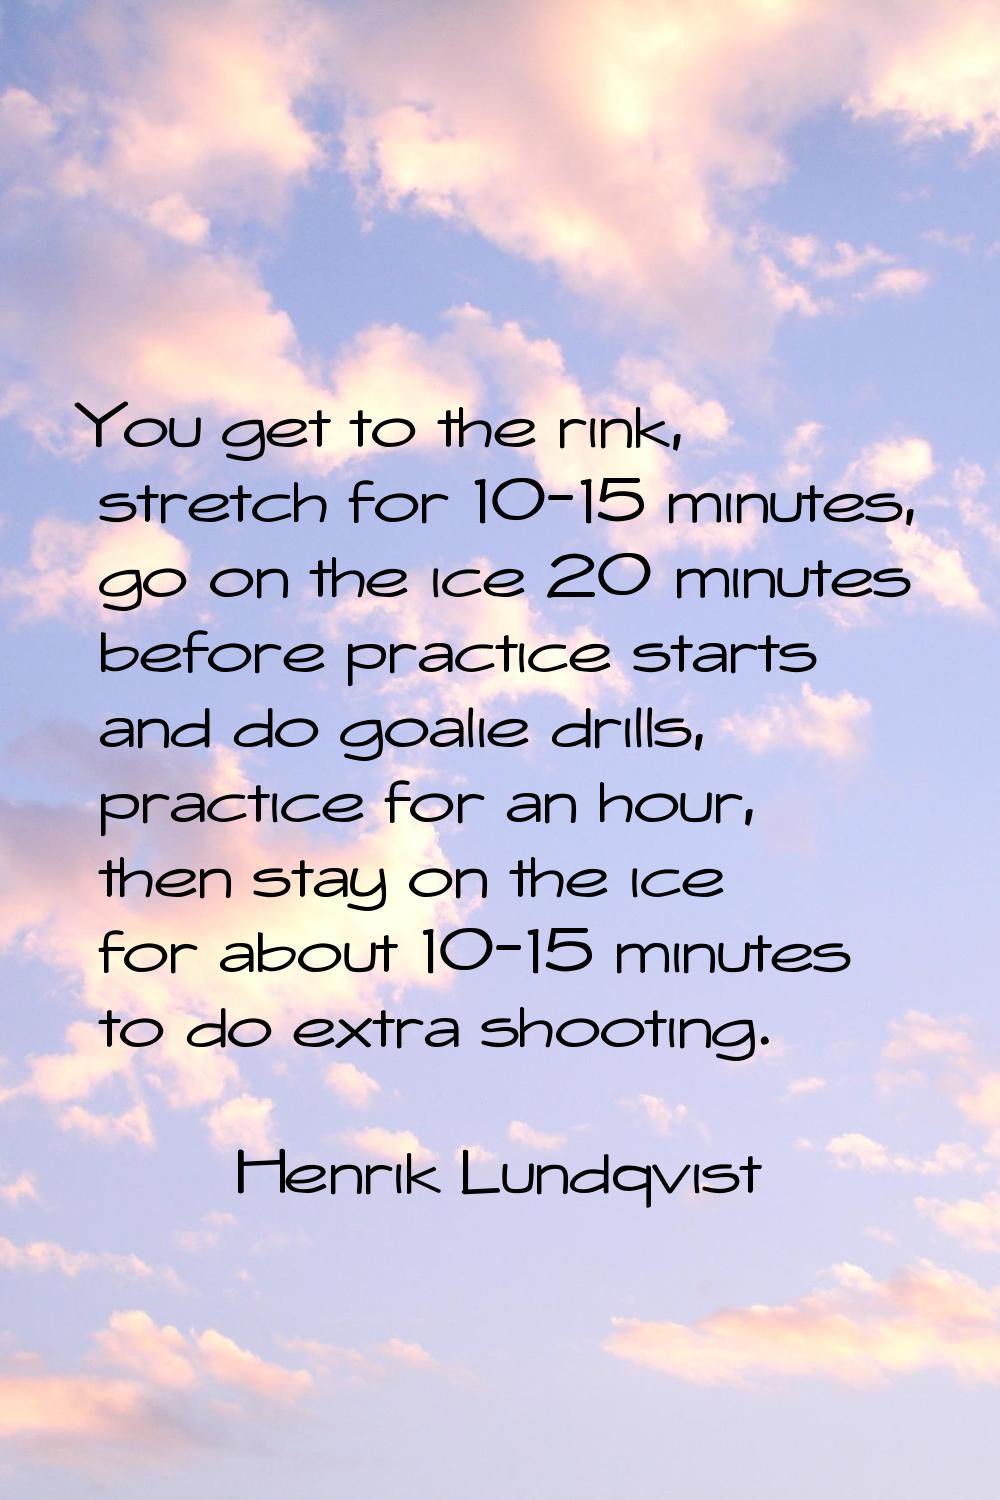 You get to the rink, stretch for 10-15 minutes, go on the ice 20 minutes before practice starts and